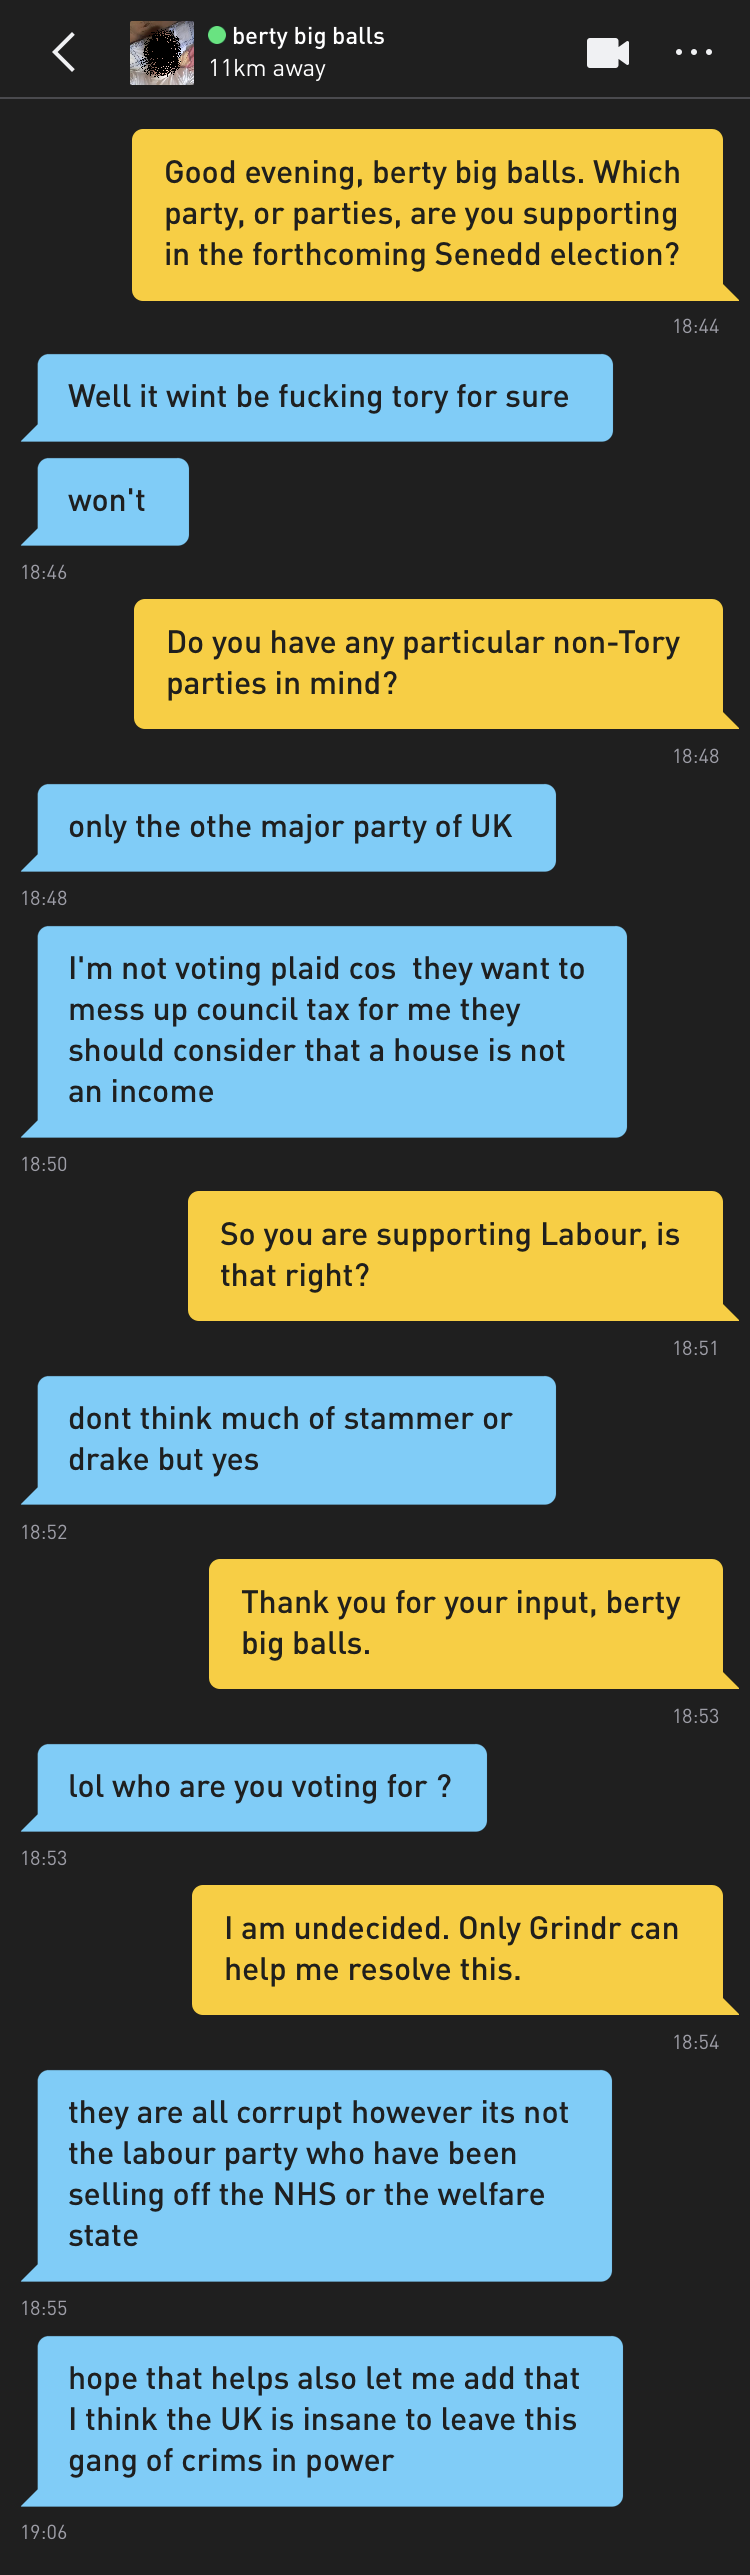 Me: Good evening, berty big balls. Which party, or parties, are you supporting in the forthcoming Senedd election? berty big balls: Well it wint be fucking tory for sure berty big balls: won't Me: Do you have any particular non-Tory parties in mind? berty big balls: only the othe major party of UK berty big balls: I'm not voting plaid cos they want to mess up council tax for me they should consider that a house is not an income Me: So you are supporting Labour, is that right? berty big balls: dont think much of stammer or drake but yes Me: Thank you for your input, berty big balls. berty big balls: lol who are you voting for ? Me: I am undecided. Only Grindr can help me resolve this. berty big balls: they are all corrupt however its not the labour party who have been selling off the NHS or the welfare state berty big balls: hope that helps also let me add that I think the UK is insane to leave this gang of crims in power